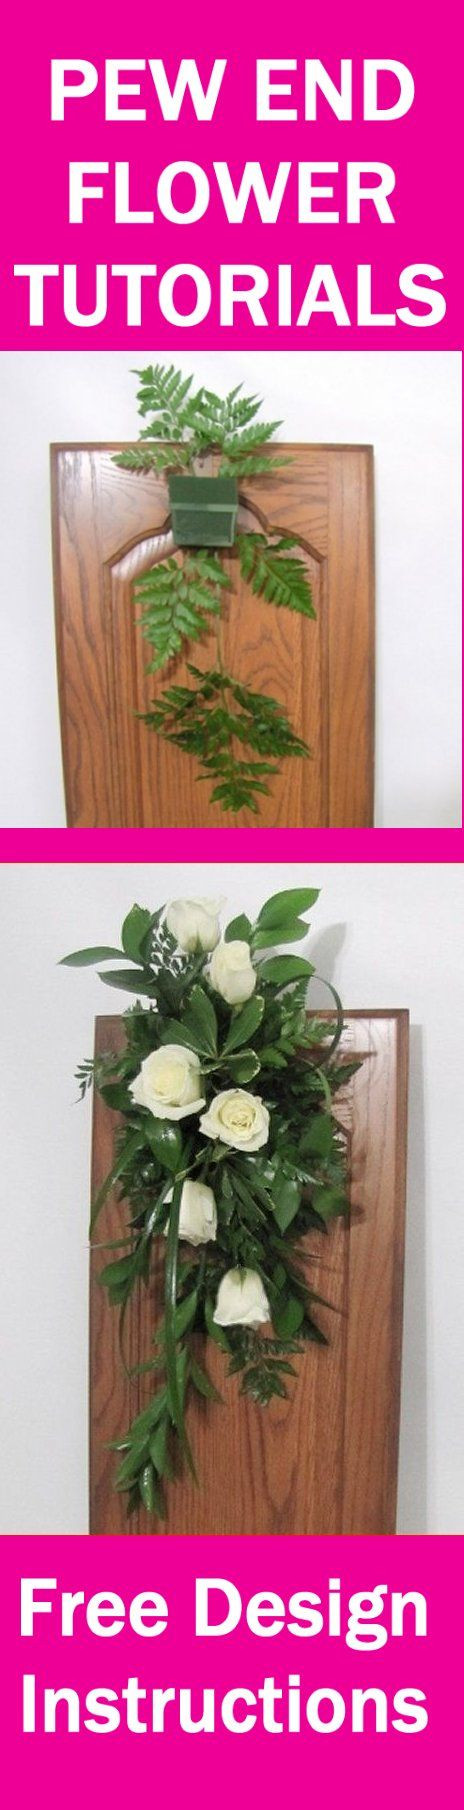 16 Perfect Proflowers Free Vase 2022 free download proflowers free vase of 568 best flowers images on pinterest floral arrangements flower within wedding pew decorations easy diy flower tutorials learn how to make bridal bouquets wedding